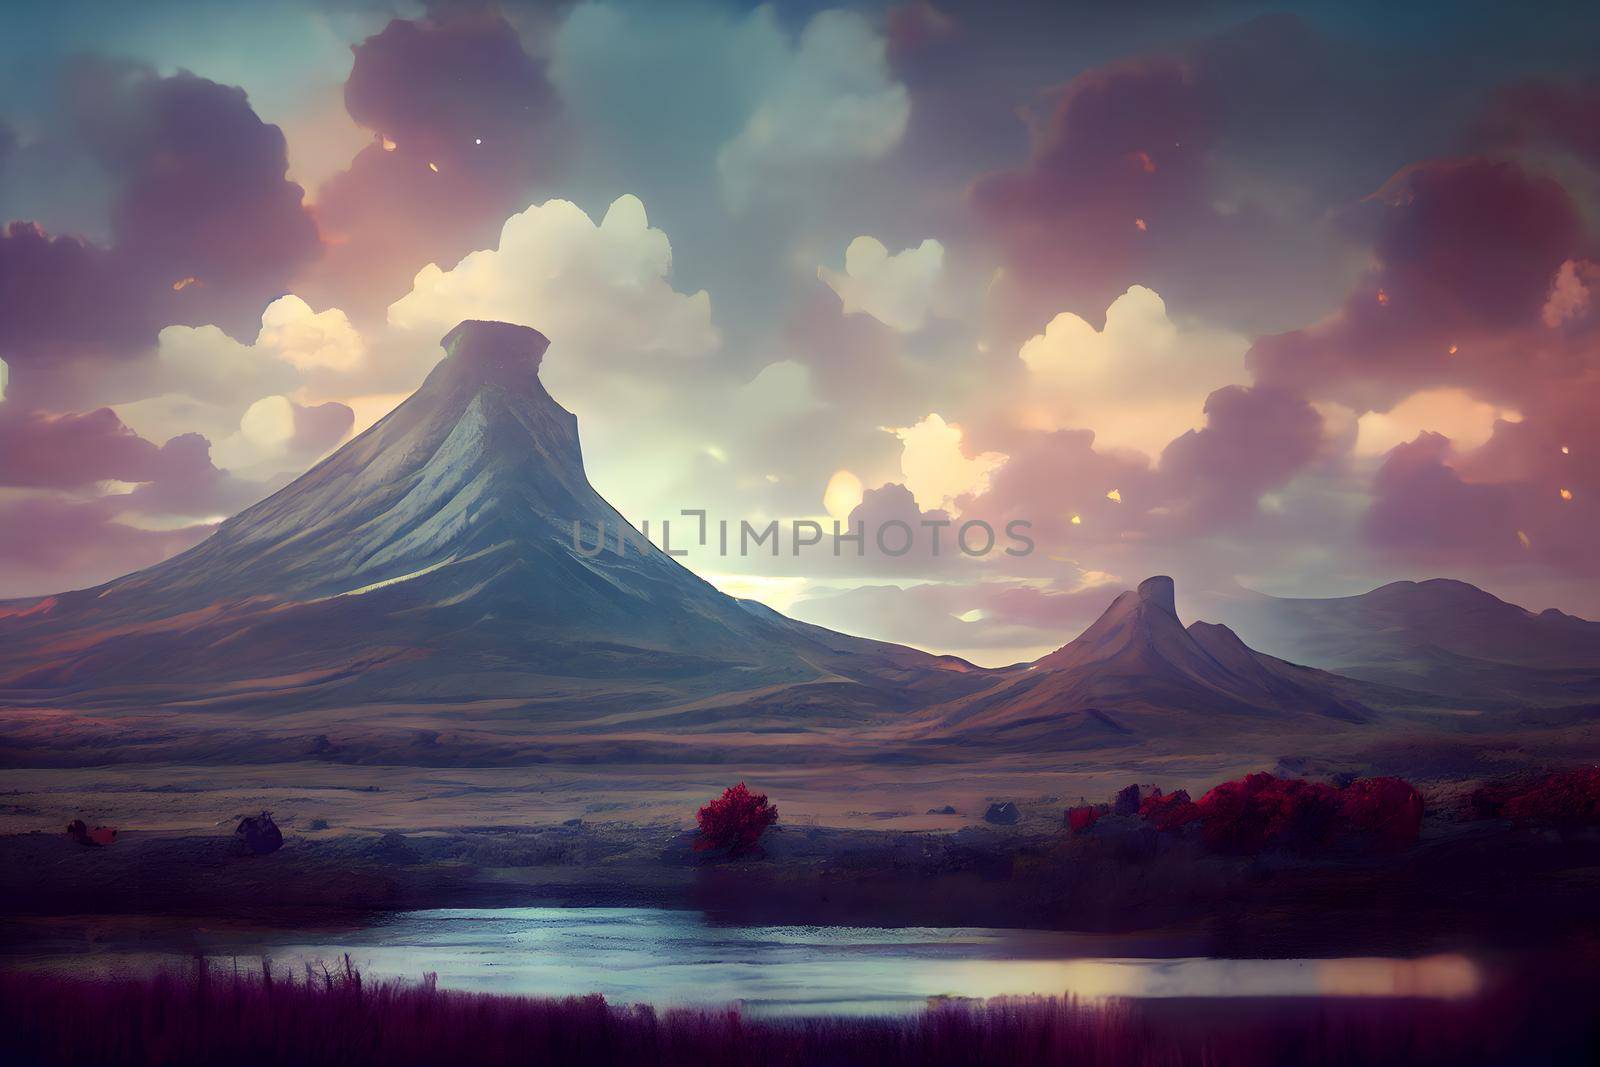 dreamy anime style summer wilderness landscape with mesa mountains, neural network generated art. Digitally generated image. Not based on any actual scene or pattern.